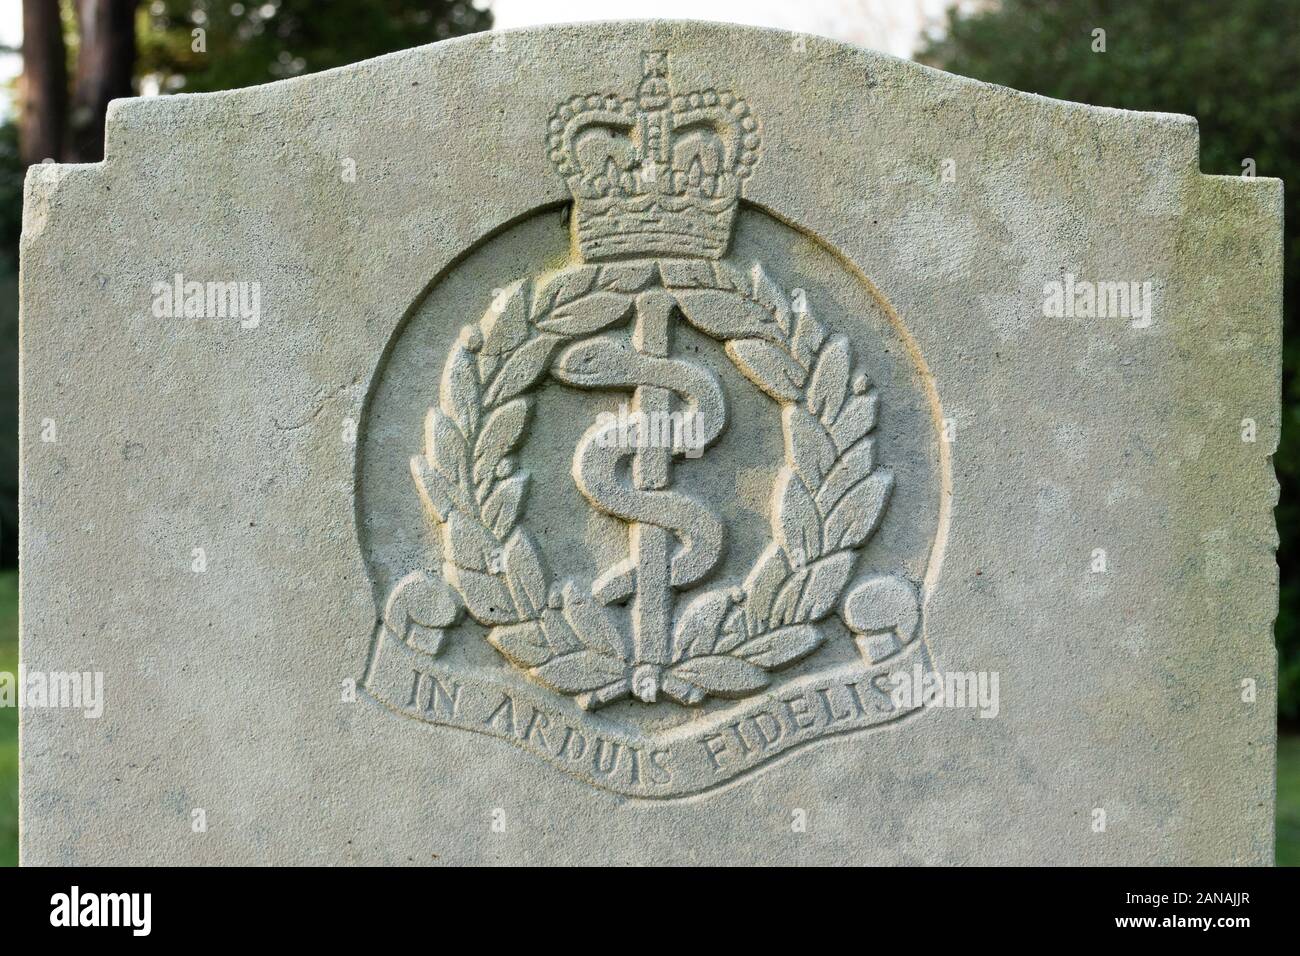 Royal Army Medical Corps regimental badge emblem crest on a military gravestone or headstone, UK Stock Photo